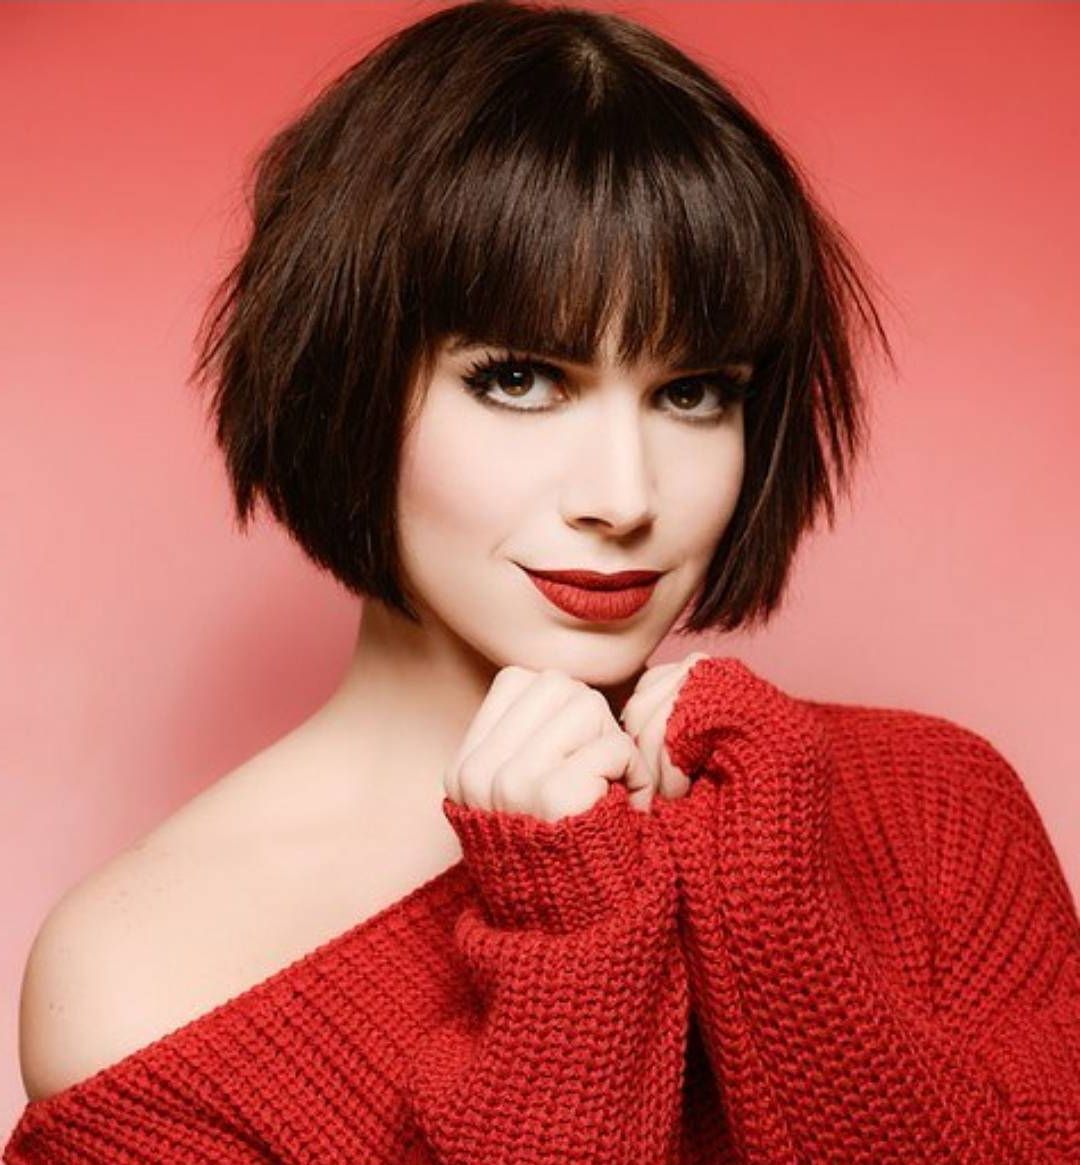 10 Chic Short Bob Haircuts That Balance Your Face Shape! Pertaining To Black Choppy Pixie Hairstyles With Red Bangs (View 13 of 20)